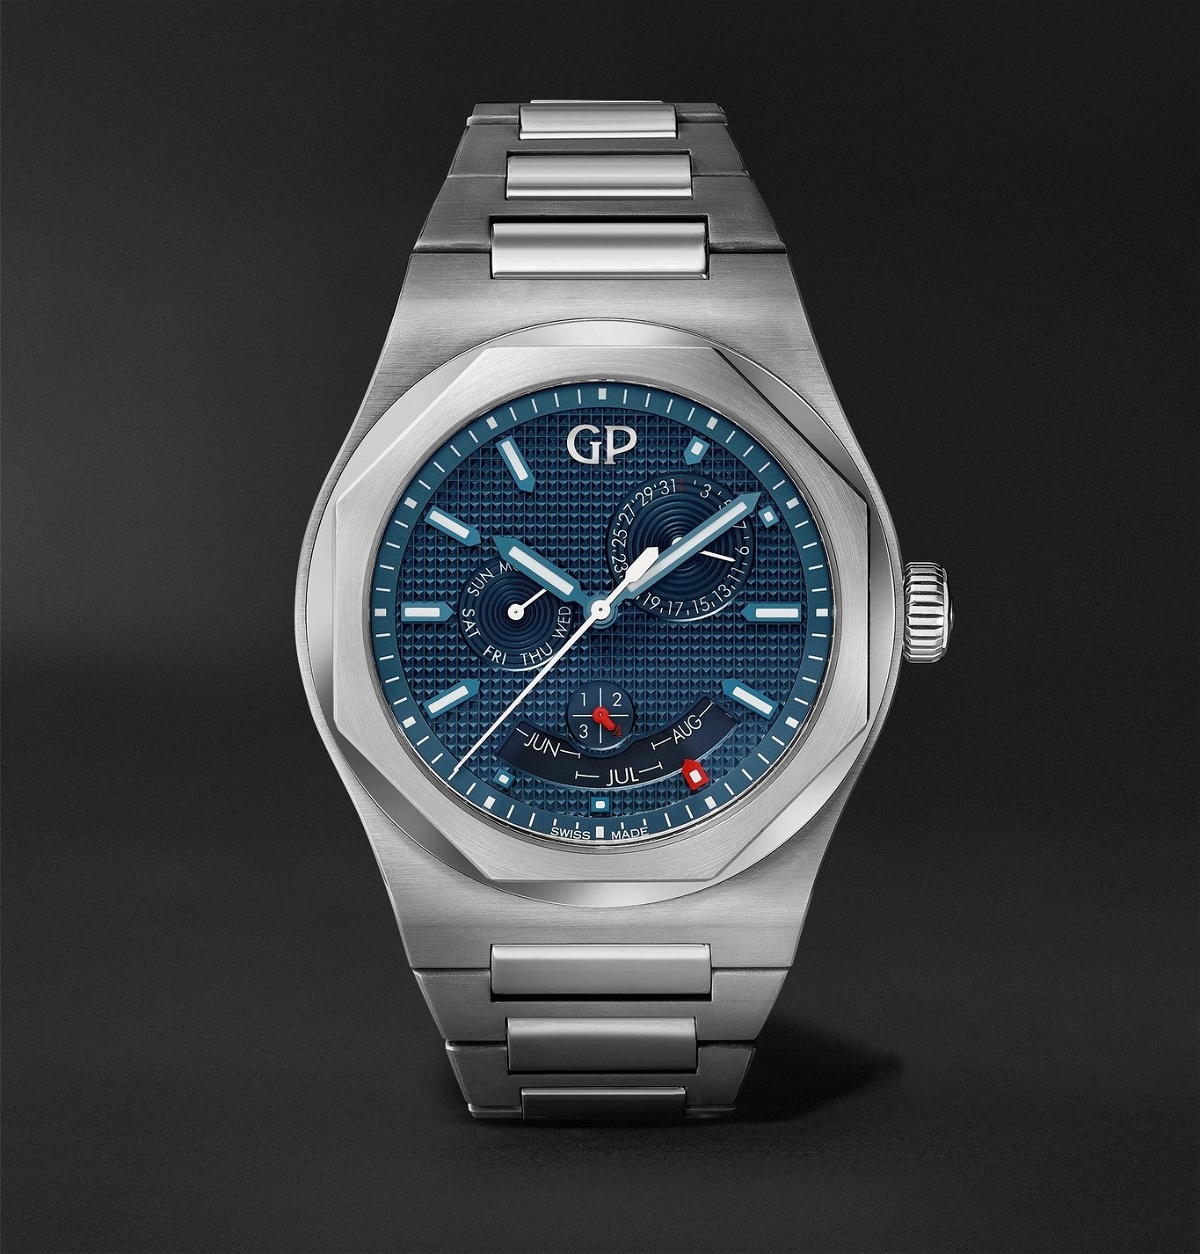 Photo: Girard-Perregaux - Laureato Perpetual Calendar 42mm Automatic Stainless Steel Watch, Ref. No. 81035-11-431-11A - Blue